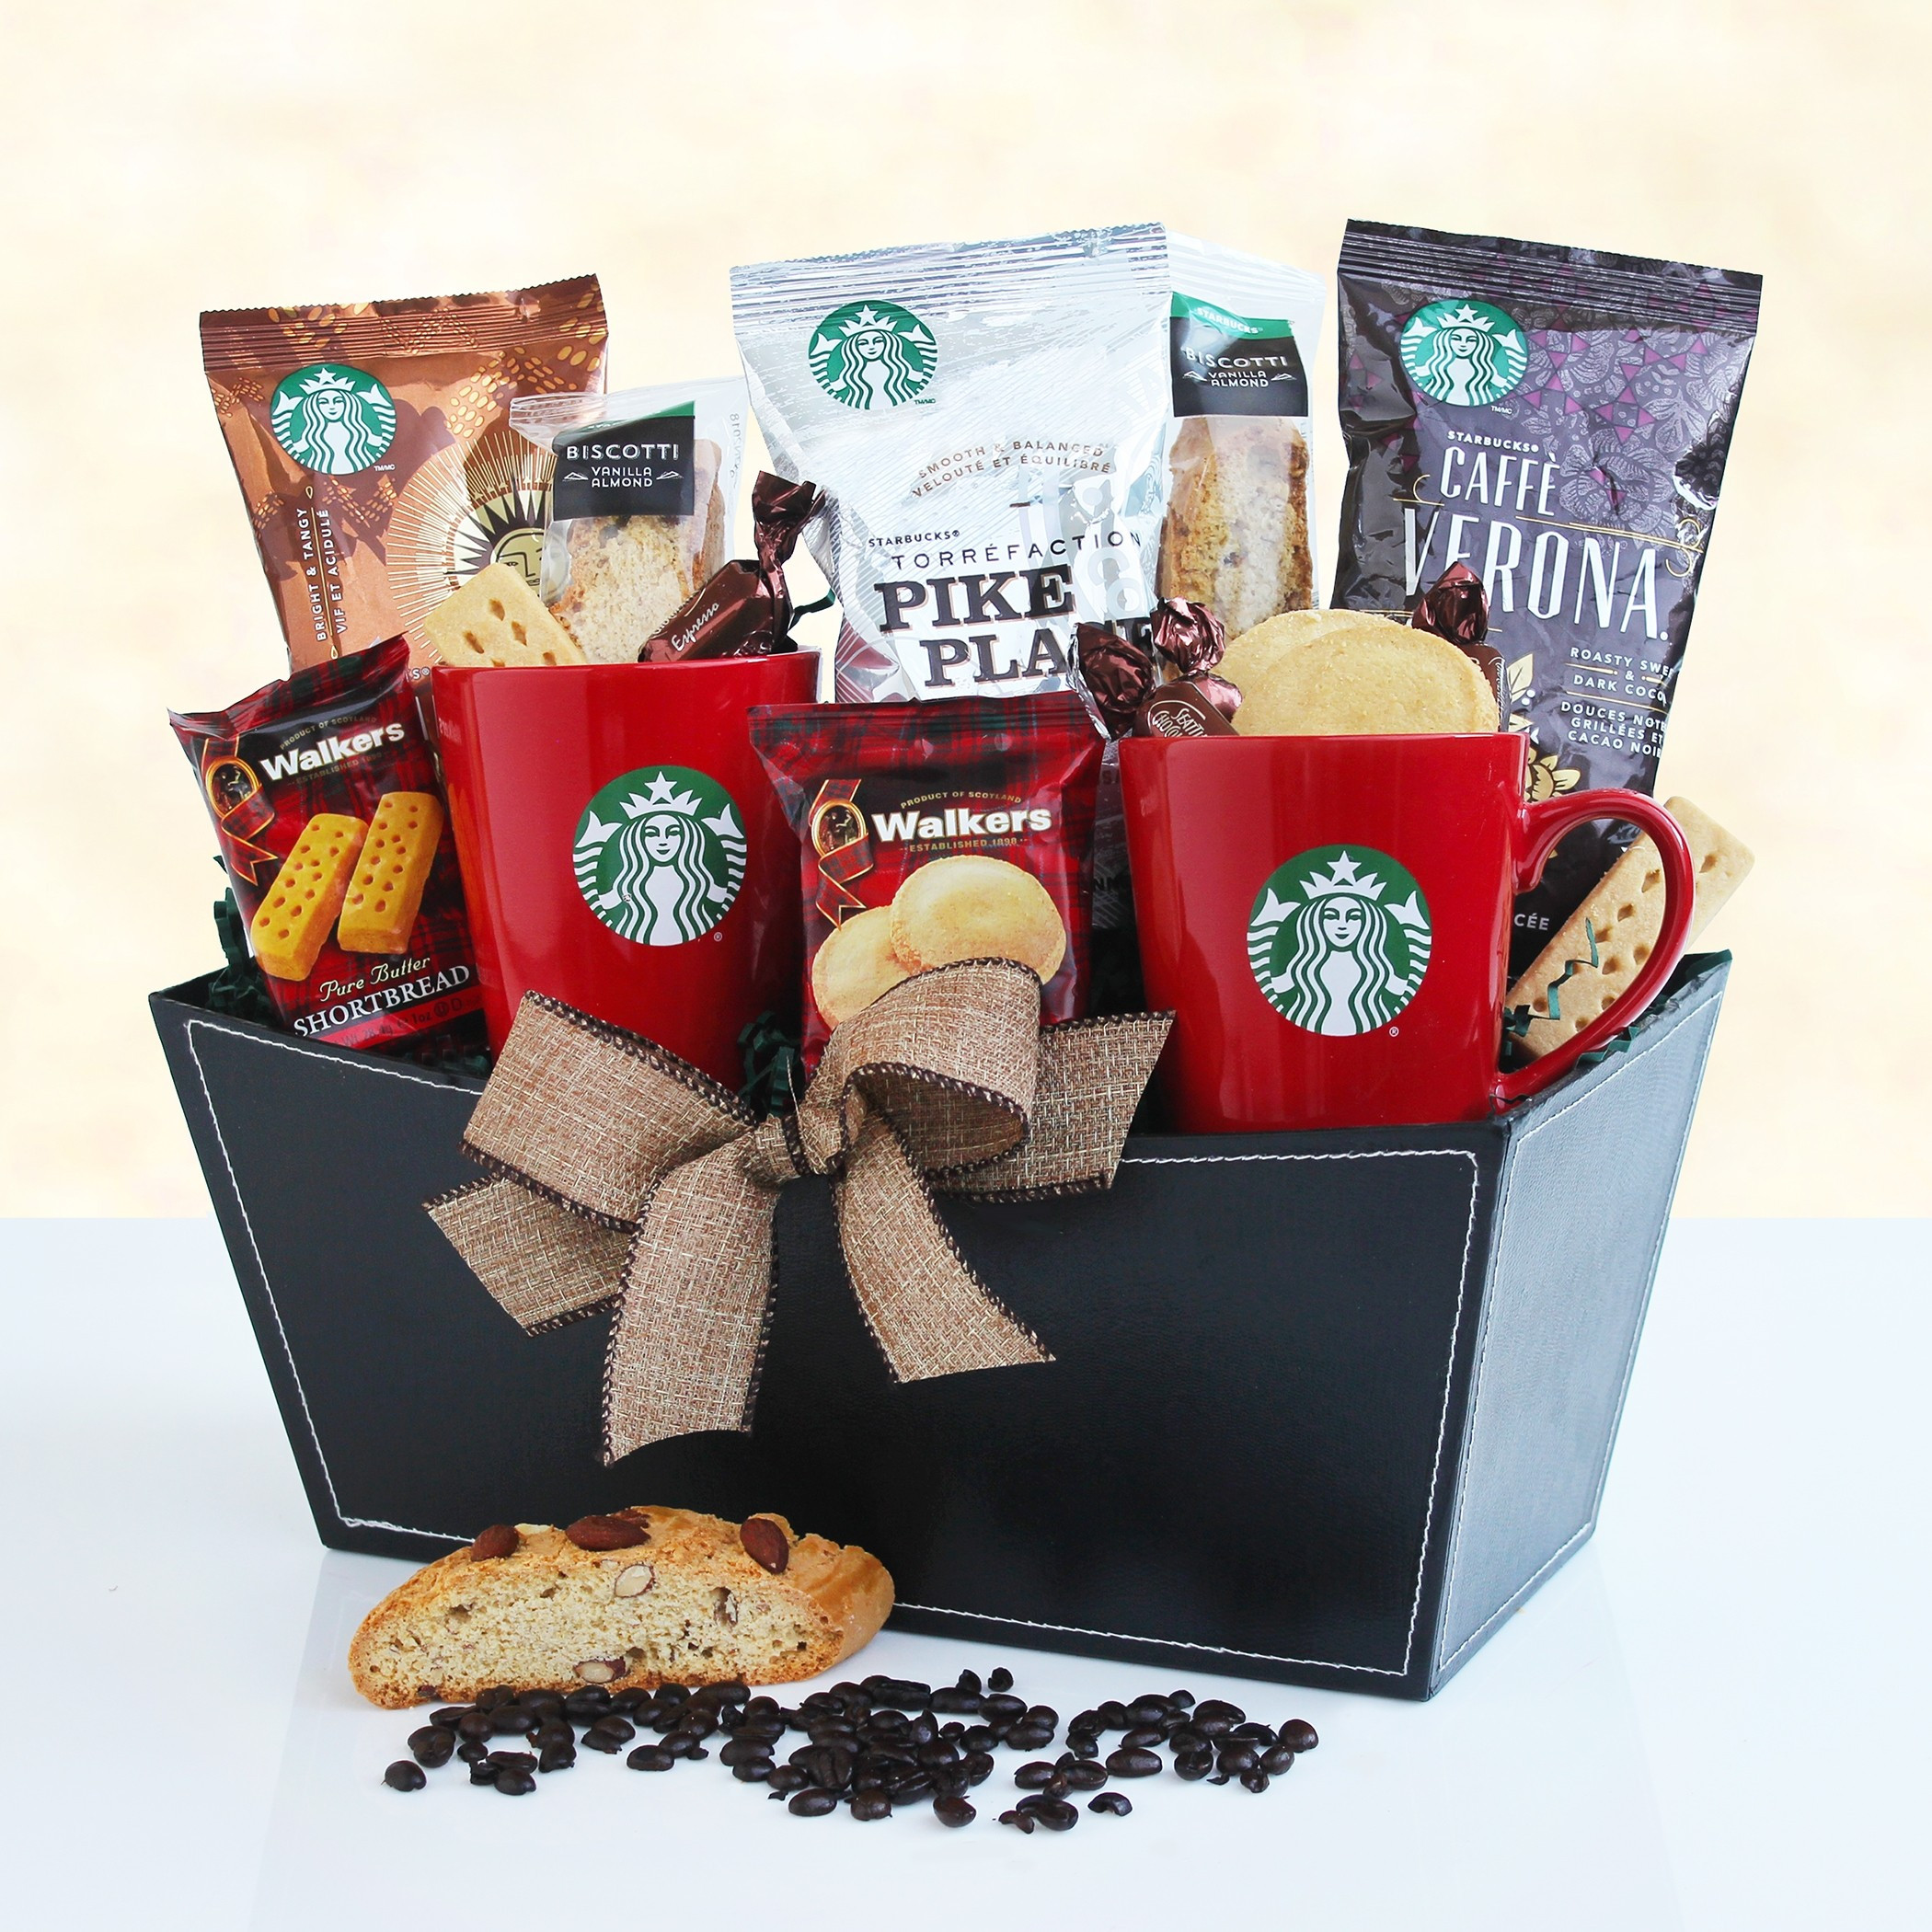 The Classic Starbucks Set for Dad